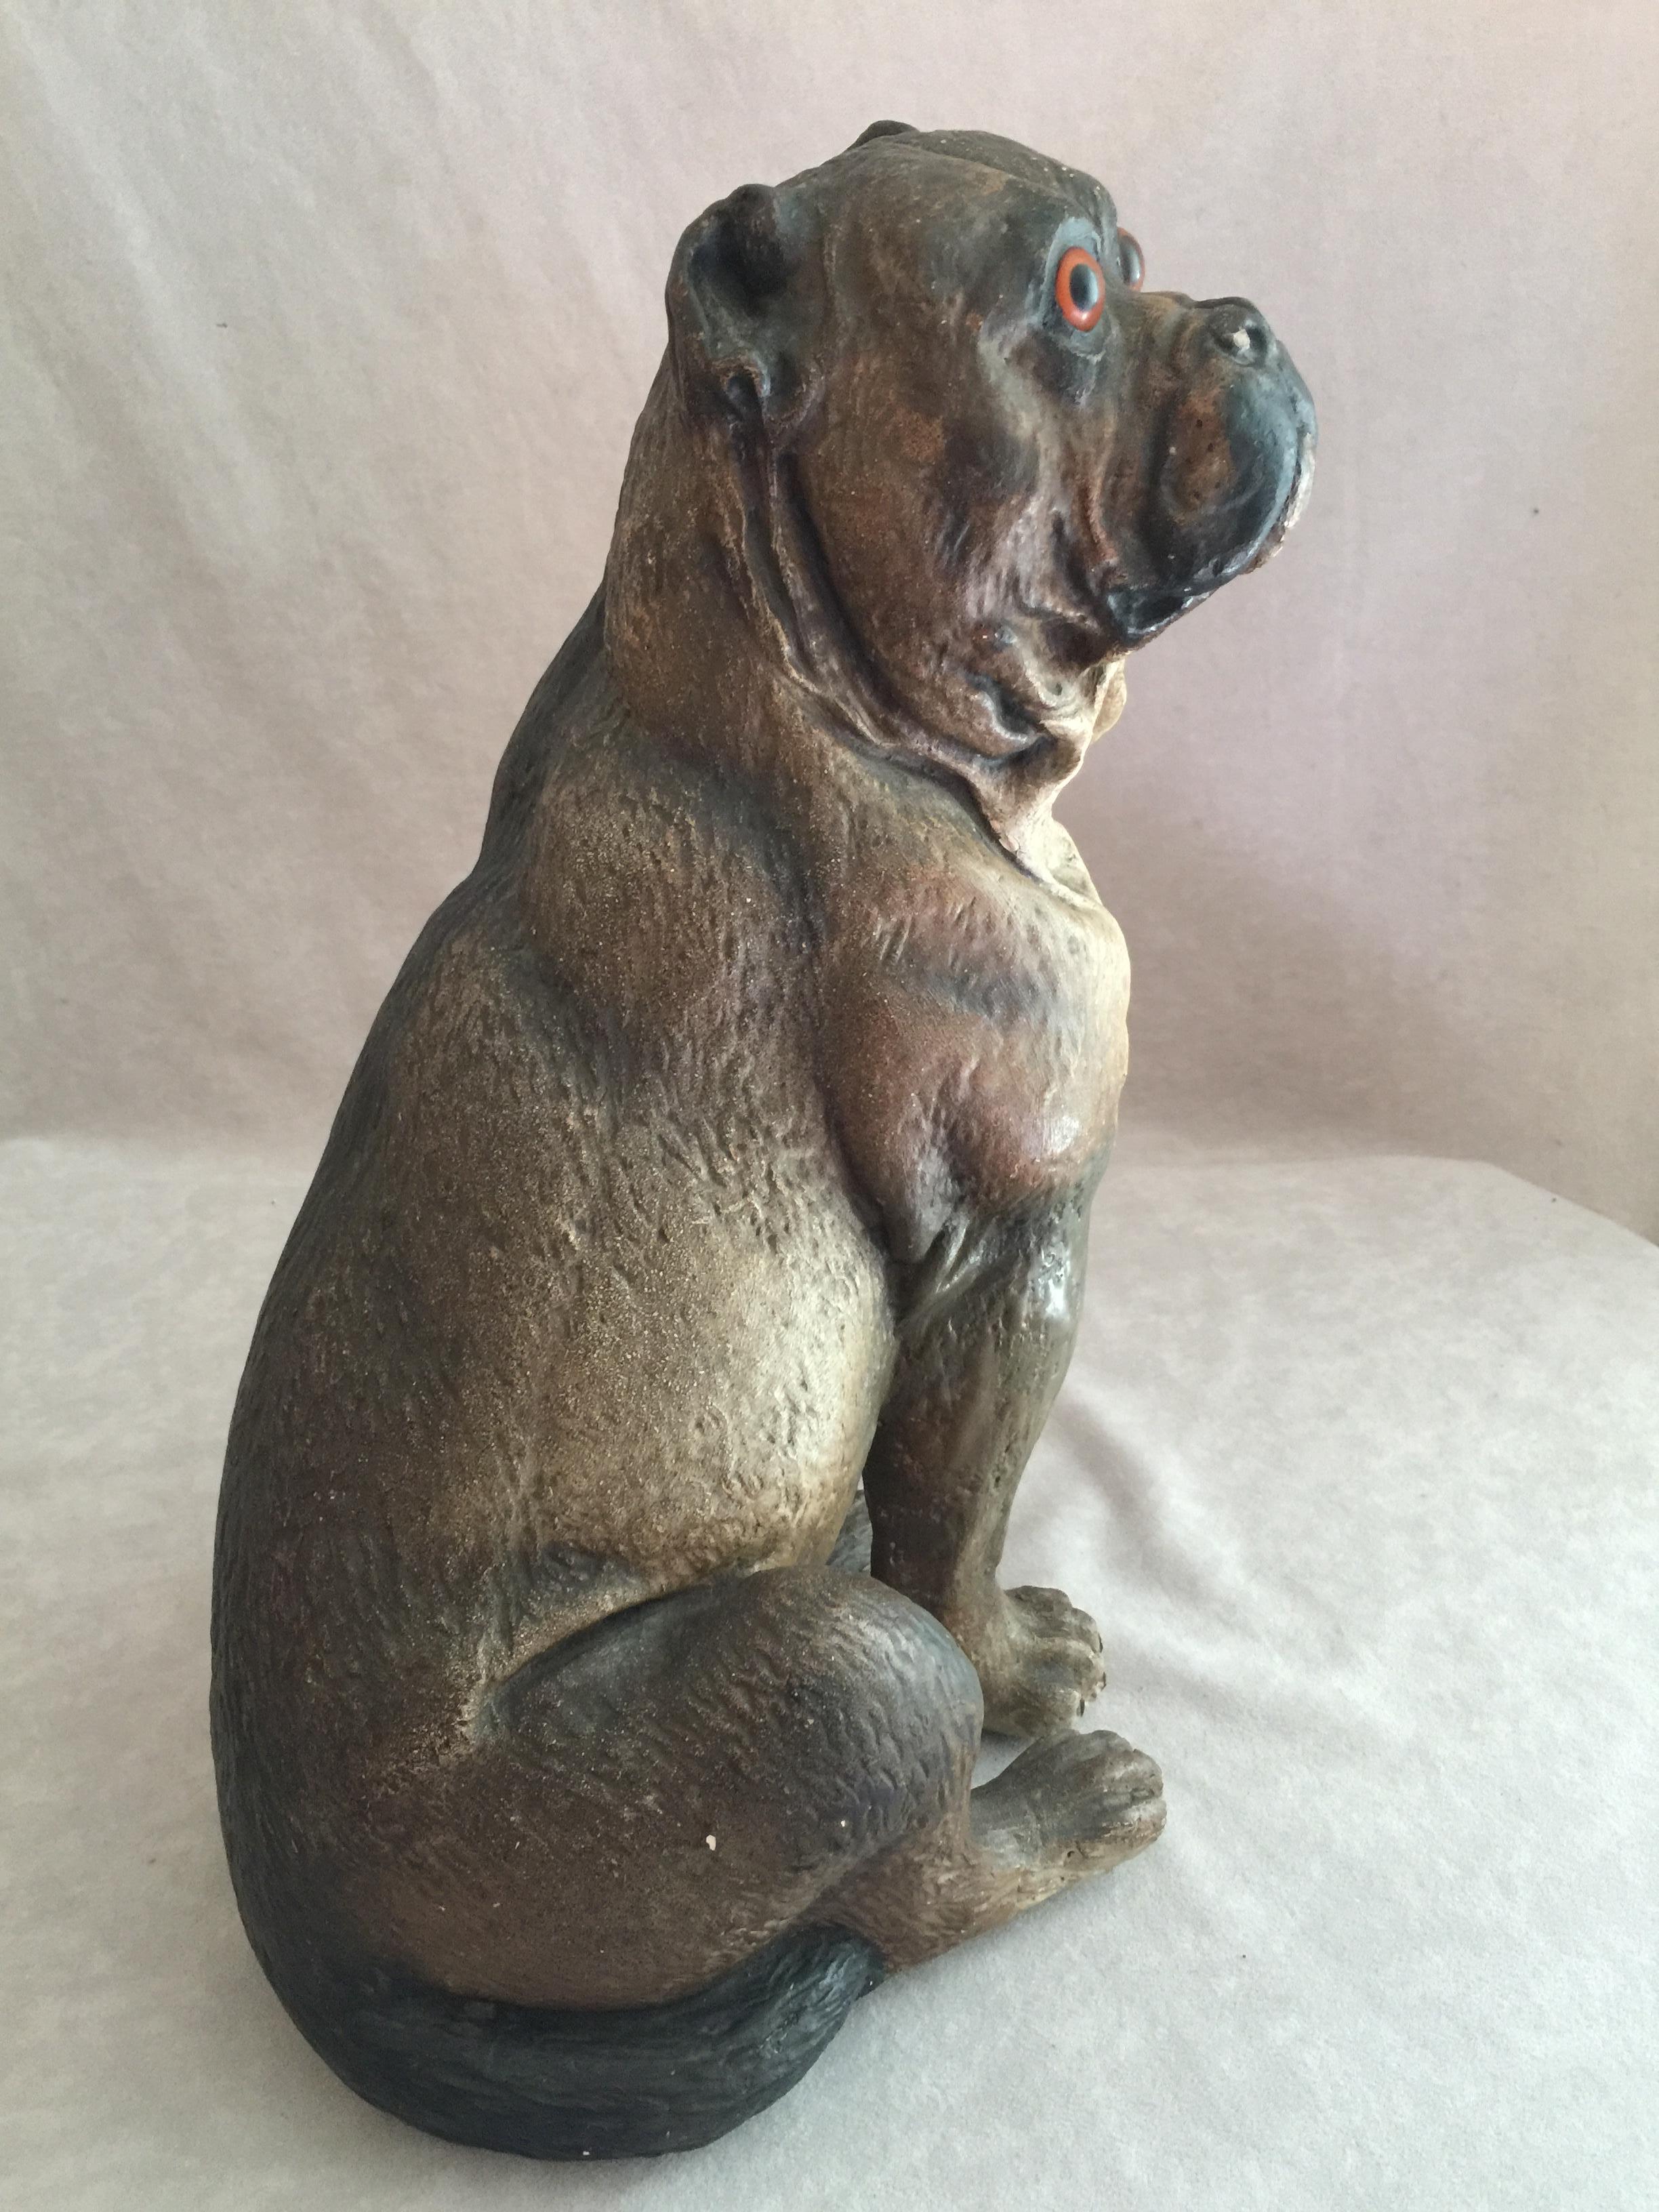 We find that some of the best examples of sculpted dogs can be found to be made of terracotta. This pug has the look of a real dog. The glass eyes, the beautifully accurately painted body, and the size, brings this sculpture to life. We are always